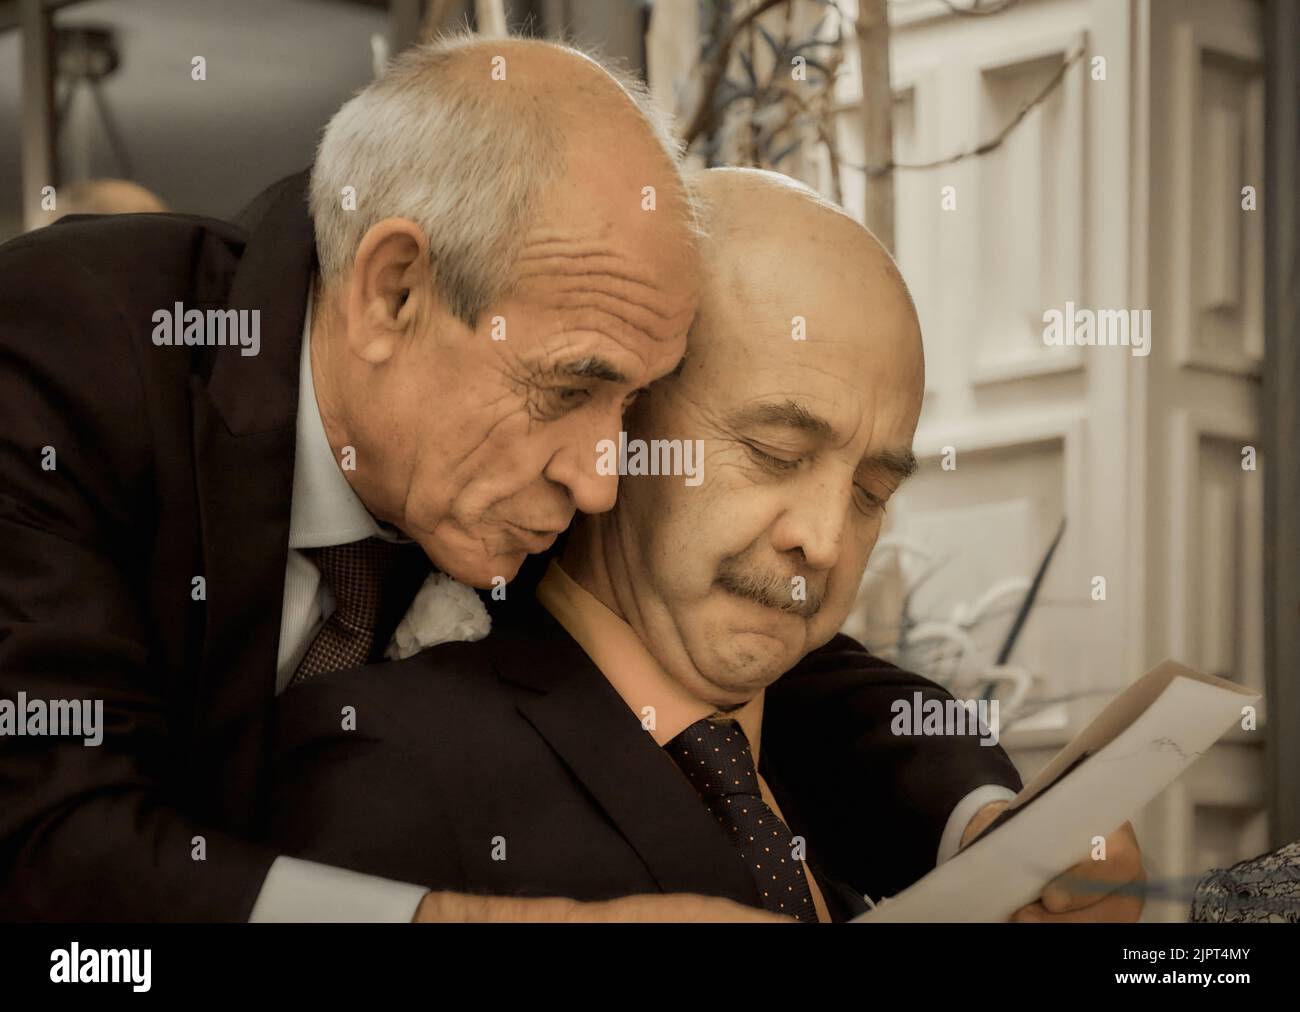 Two elderly men in suits and ties Stock Photo